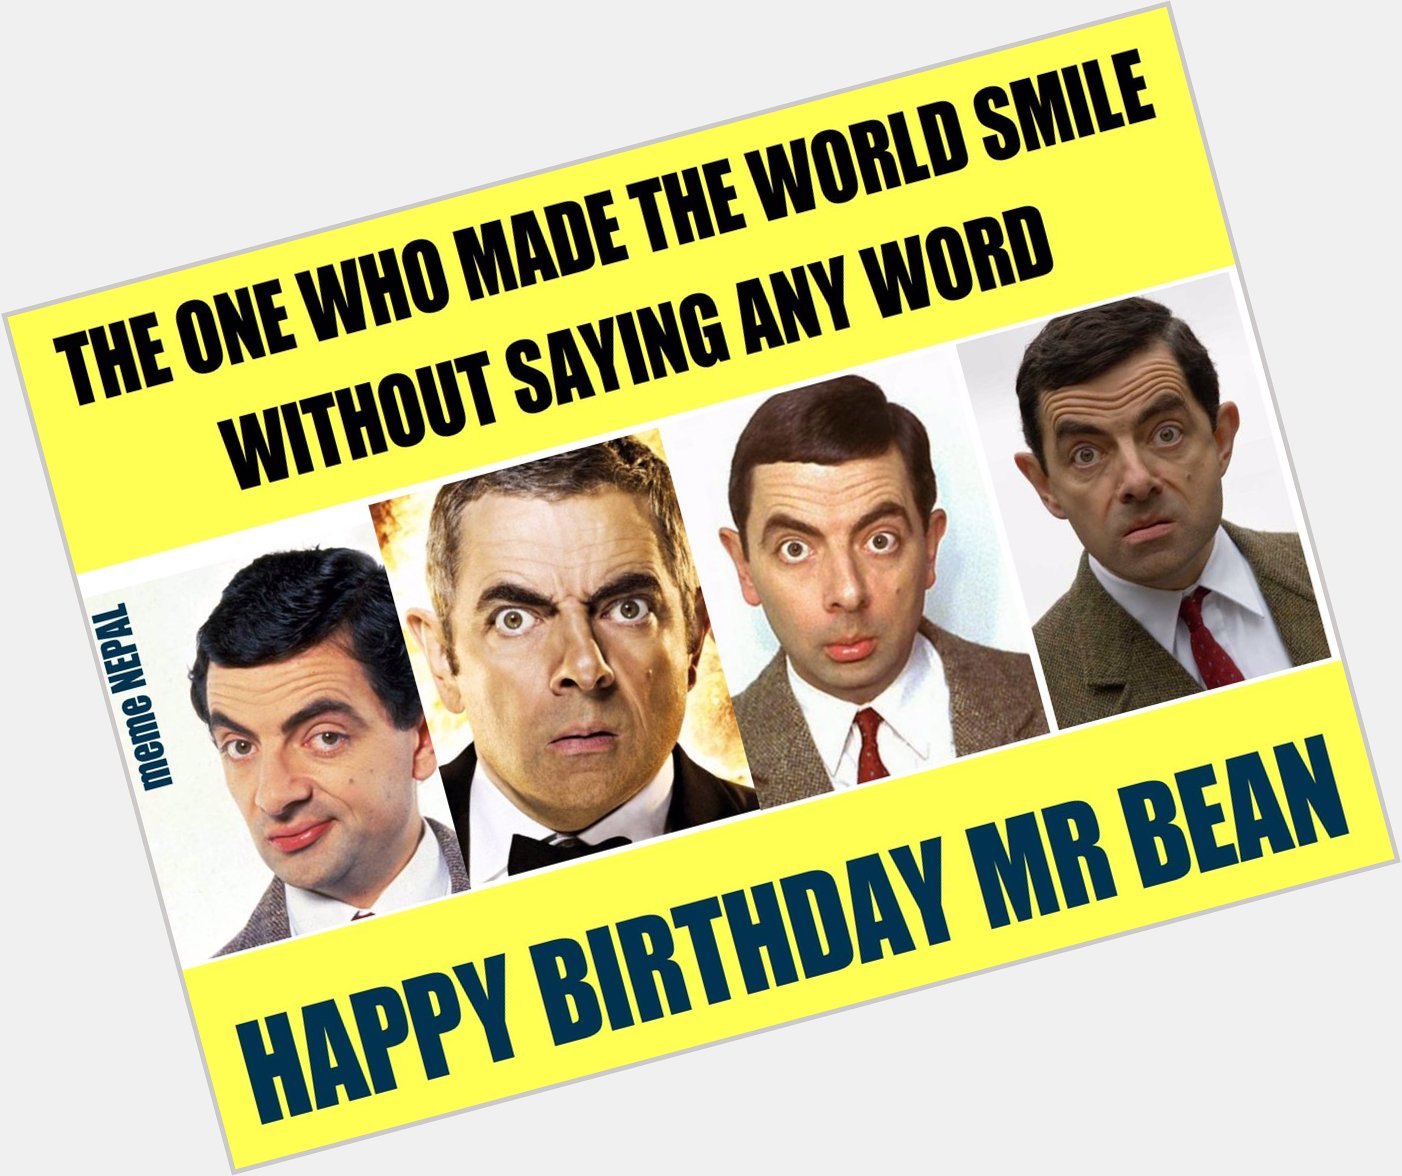 Rowan Atkinson aka Mr.Bean

Thank you for making our Days so Awesome !!
Happy Birthday !!!! 